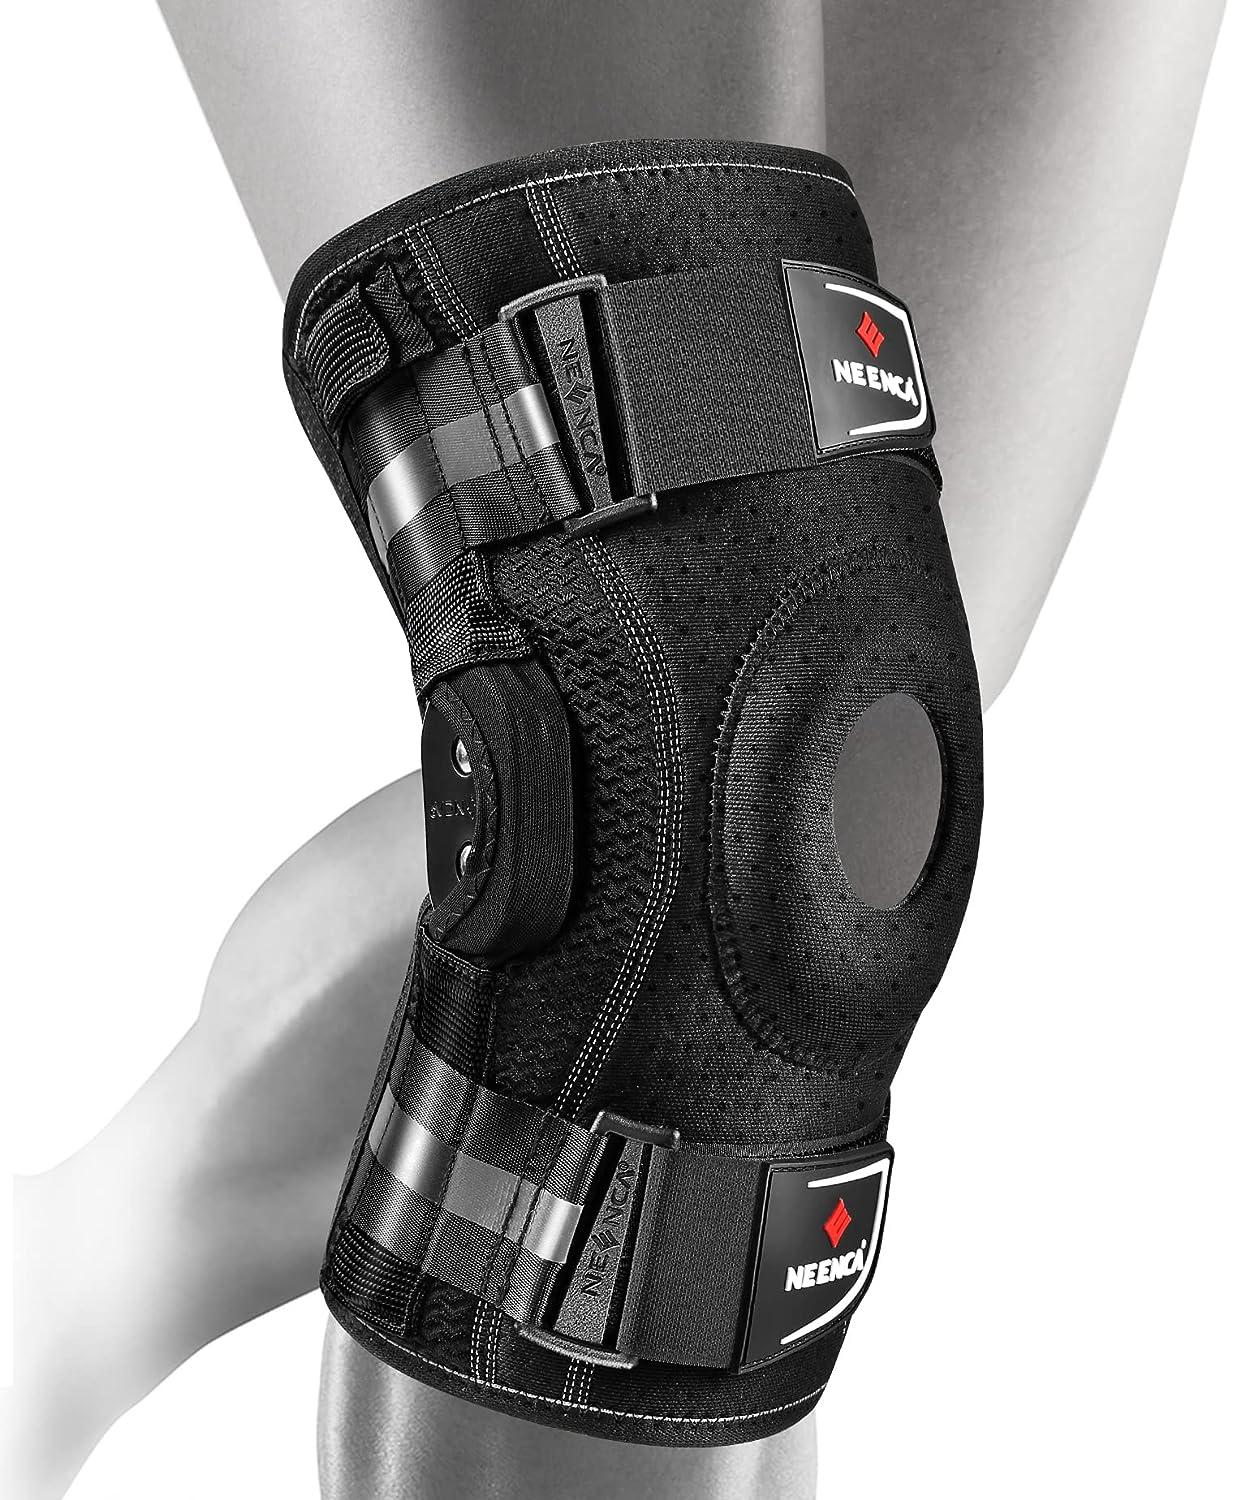 Professional Knee Brace,Knee Compression Sleeve Support for Men Women with Patella  Gel Pads & Side Stabilizers,Medical Grade Knee Pads for Running,Meniscus  Tear,ACL,Arthritis,Joint Pain Relief, gray